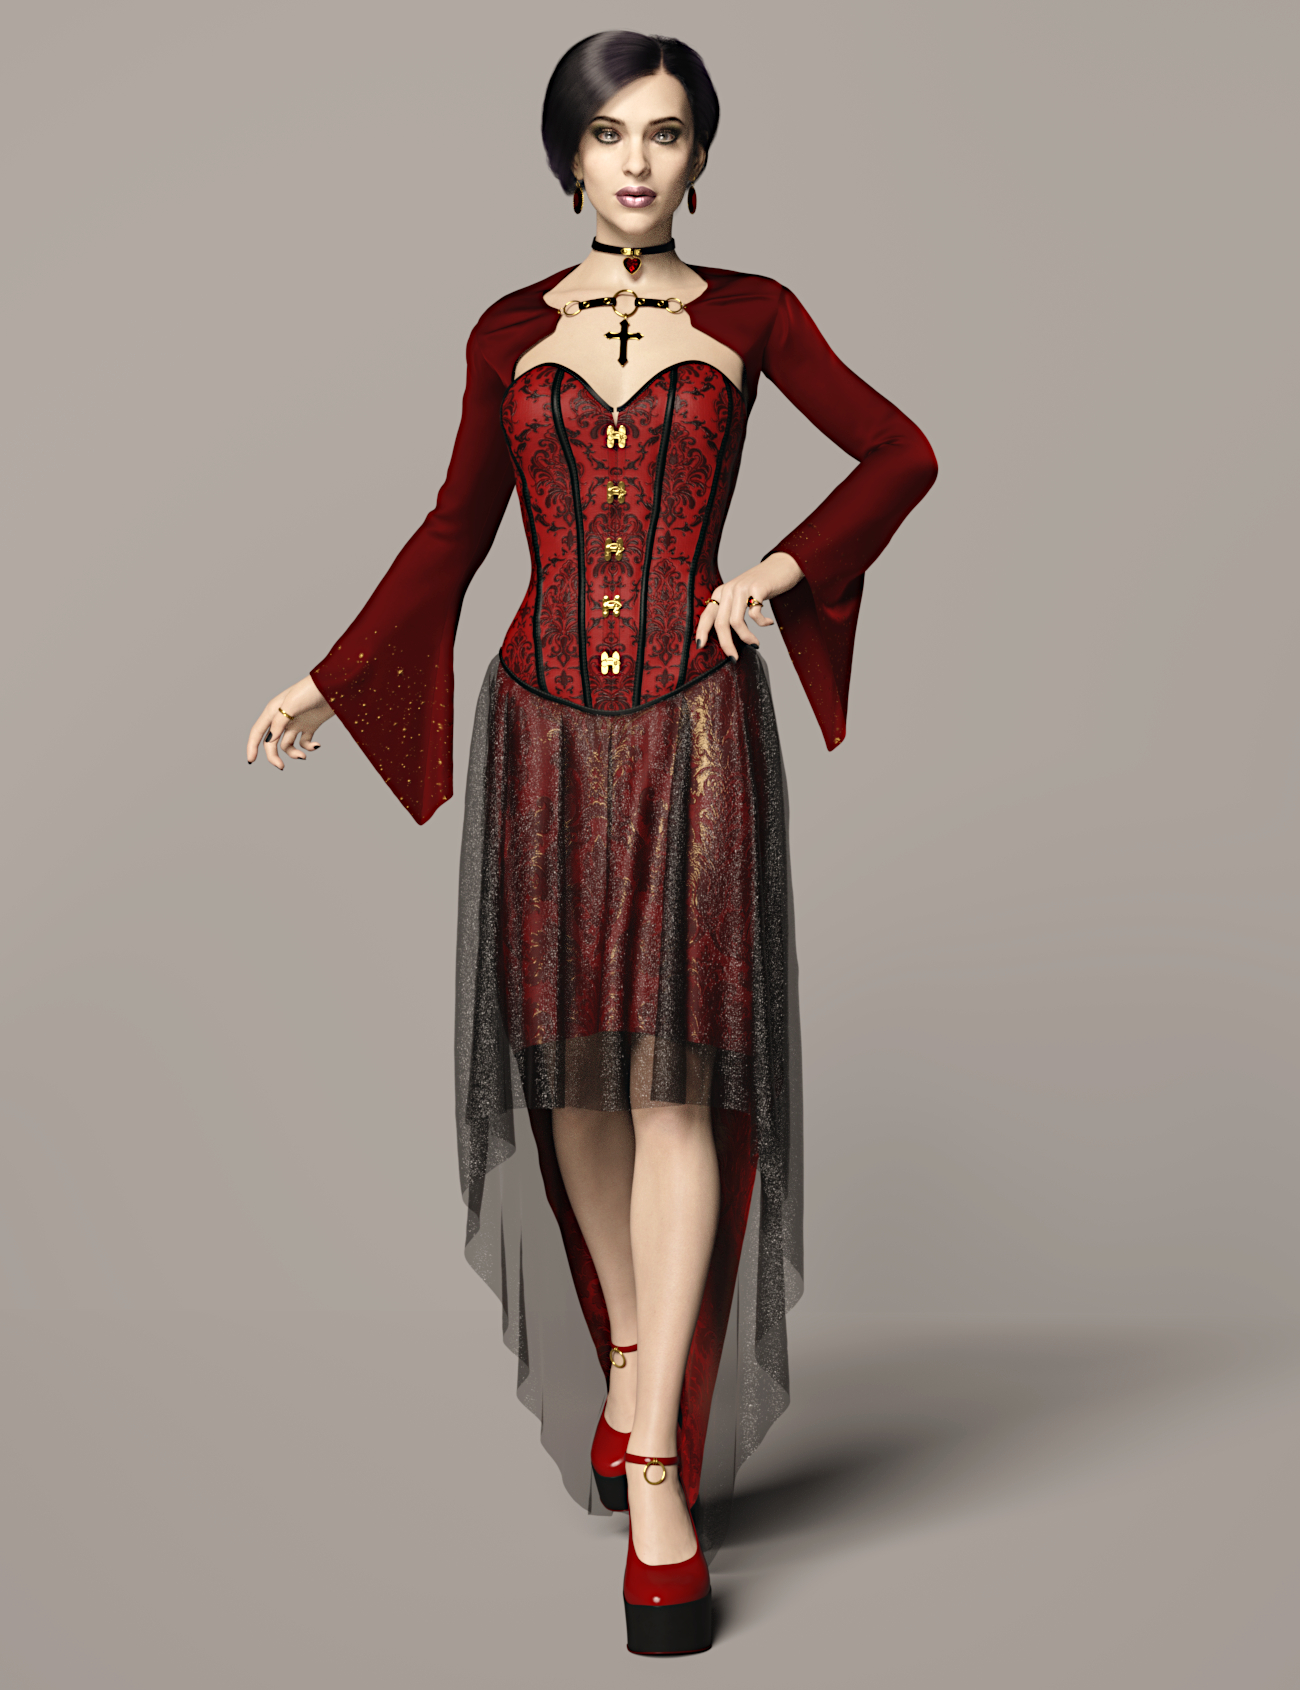 dForce Dark Vamp Outfit Texture Expansion by: Toyen, 3D Models by Daz 3D